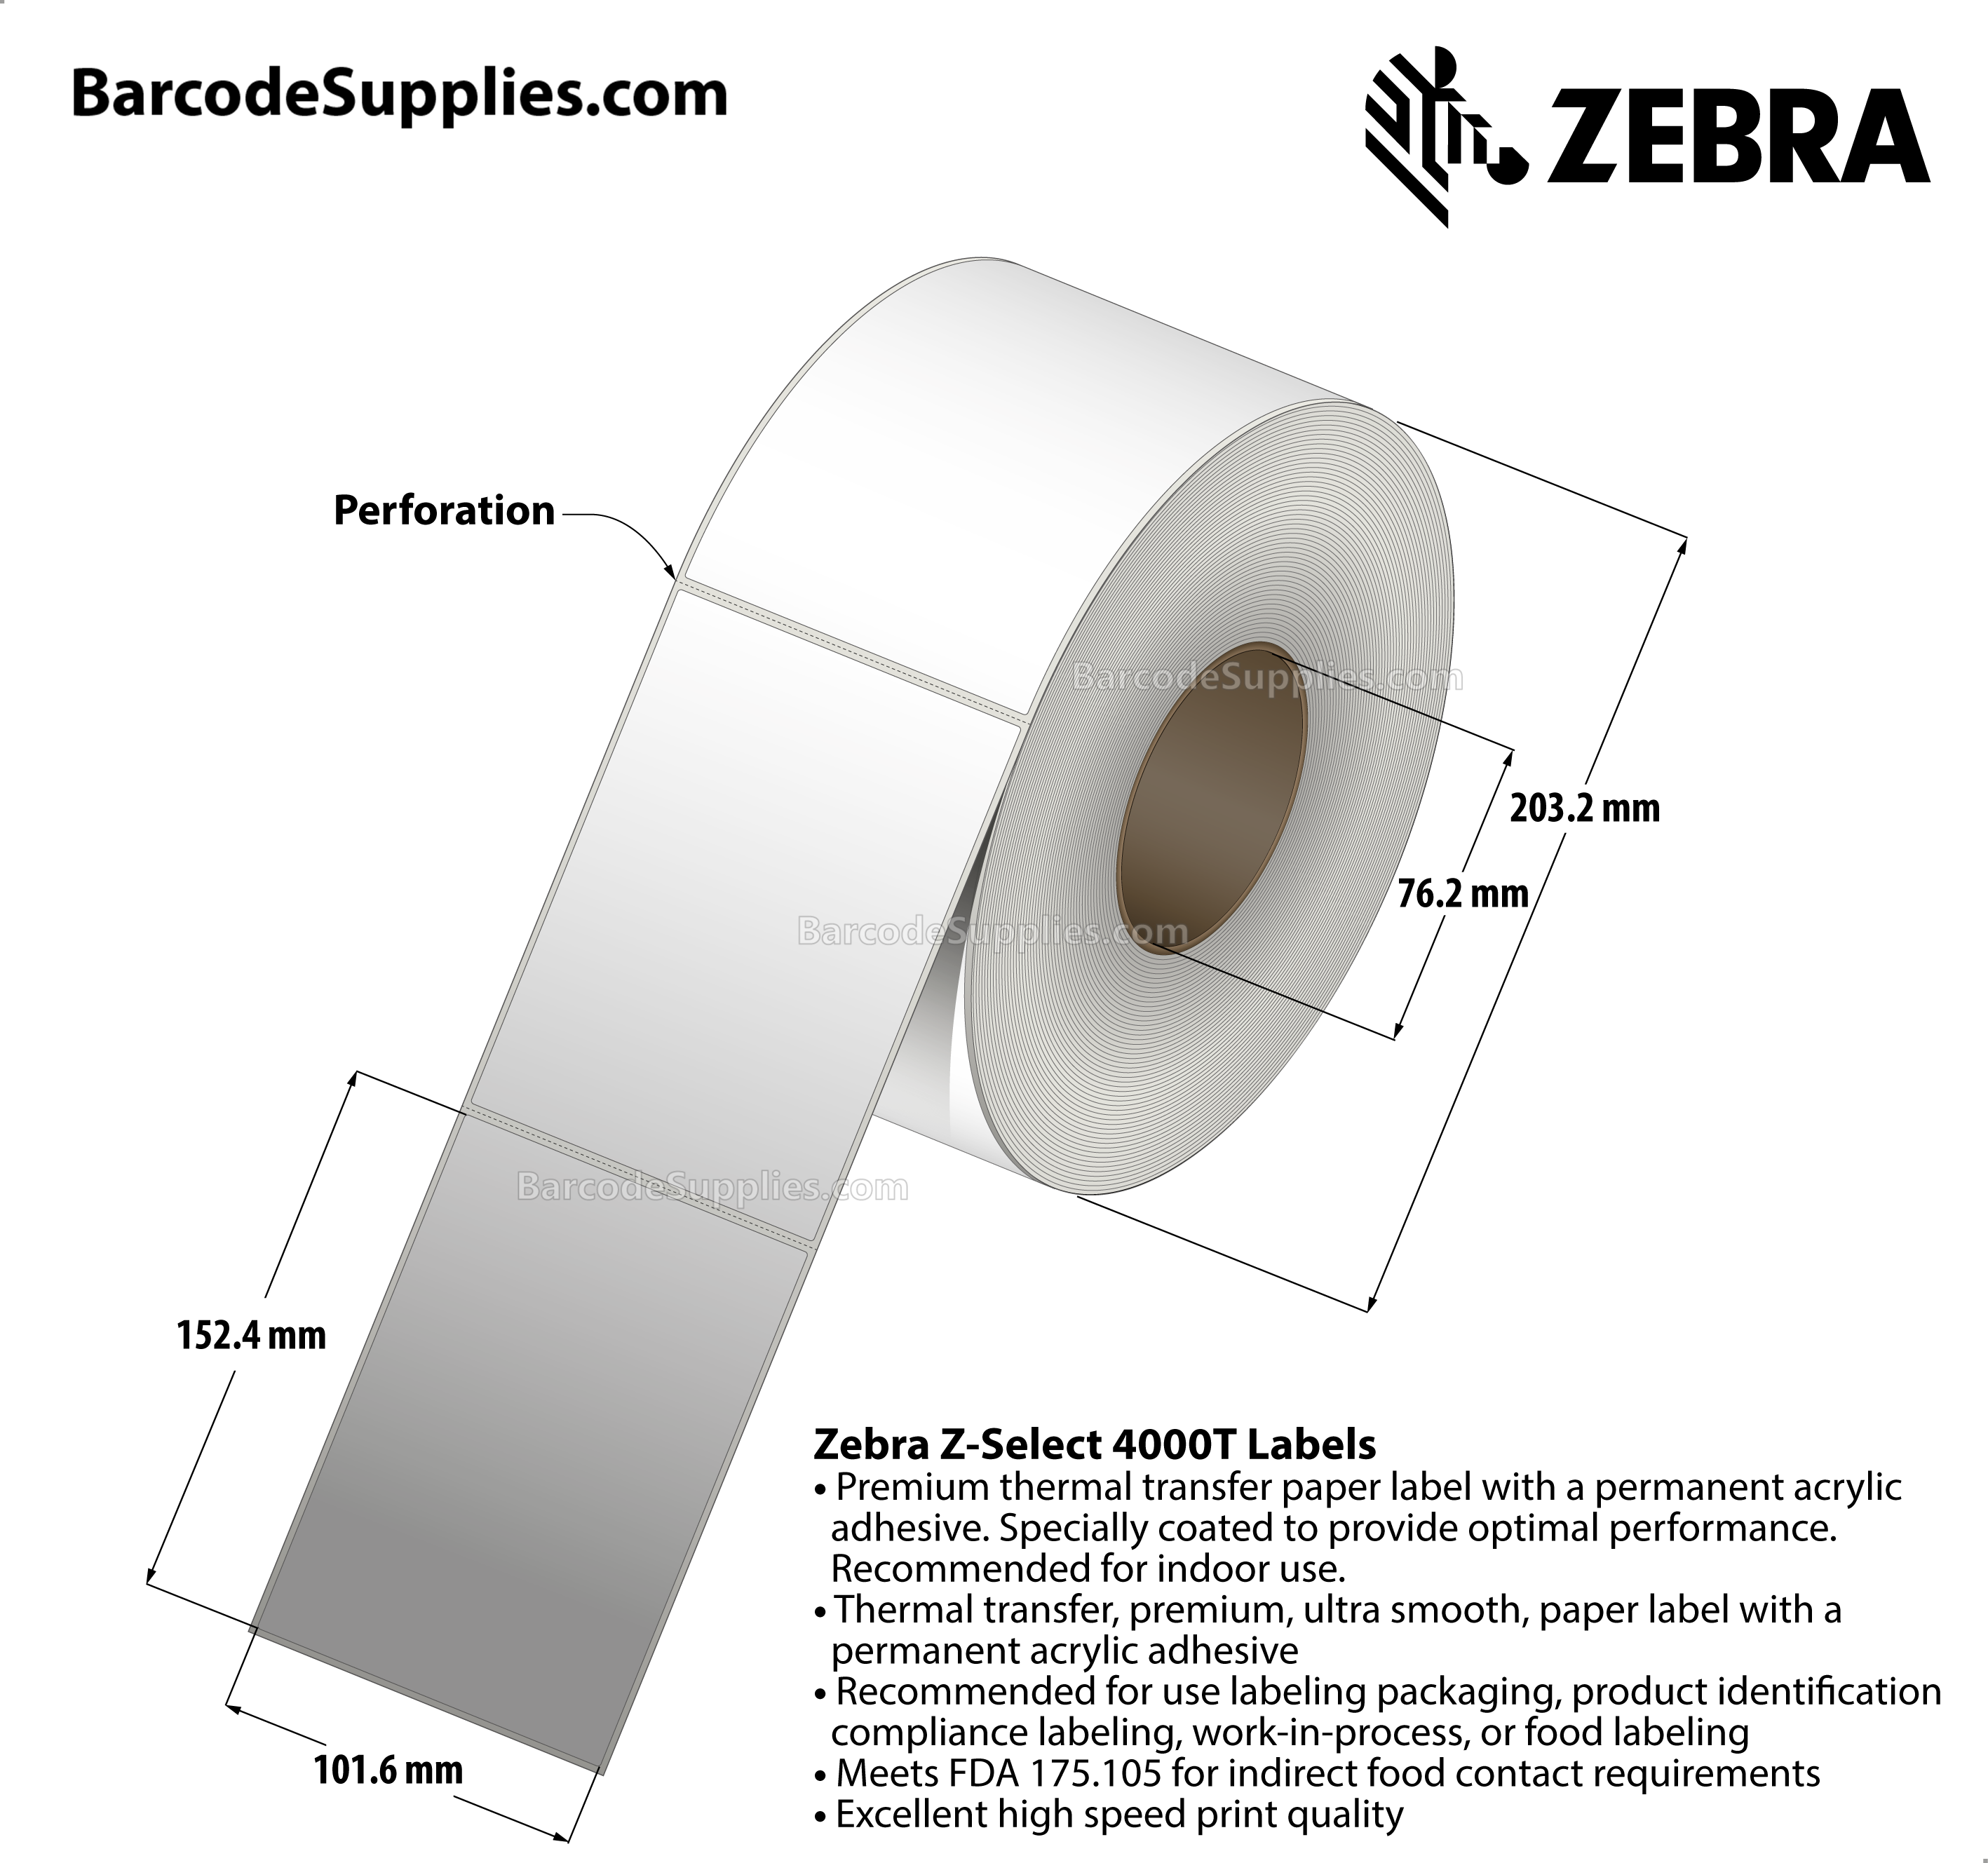 4 x 6 Thermal Transfer White Z-Select 4000T Labels With Permanent Adhesive - Perforated - 950 Labels Per Roll - Carton Of 4 Rolls - 3800 Labels Total - MPN: 72294